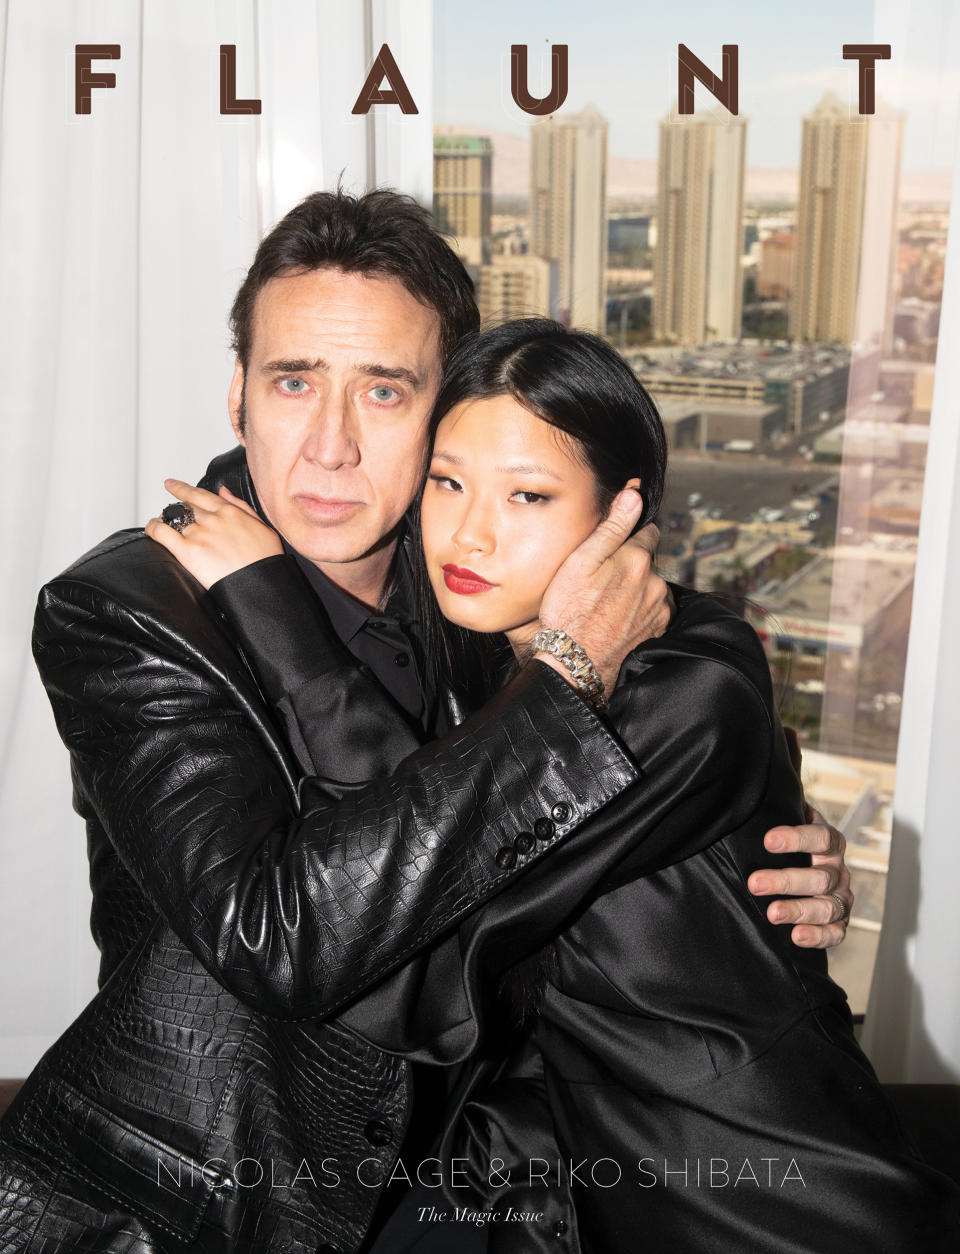 Nicolas Cage poses with wife Riko Shibata for the cover of Flaunt magazine. (Noah Dillon / Flaunt Magazine)